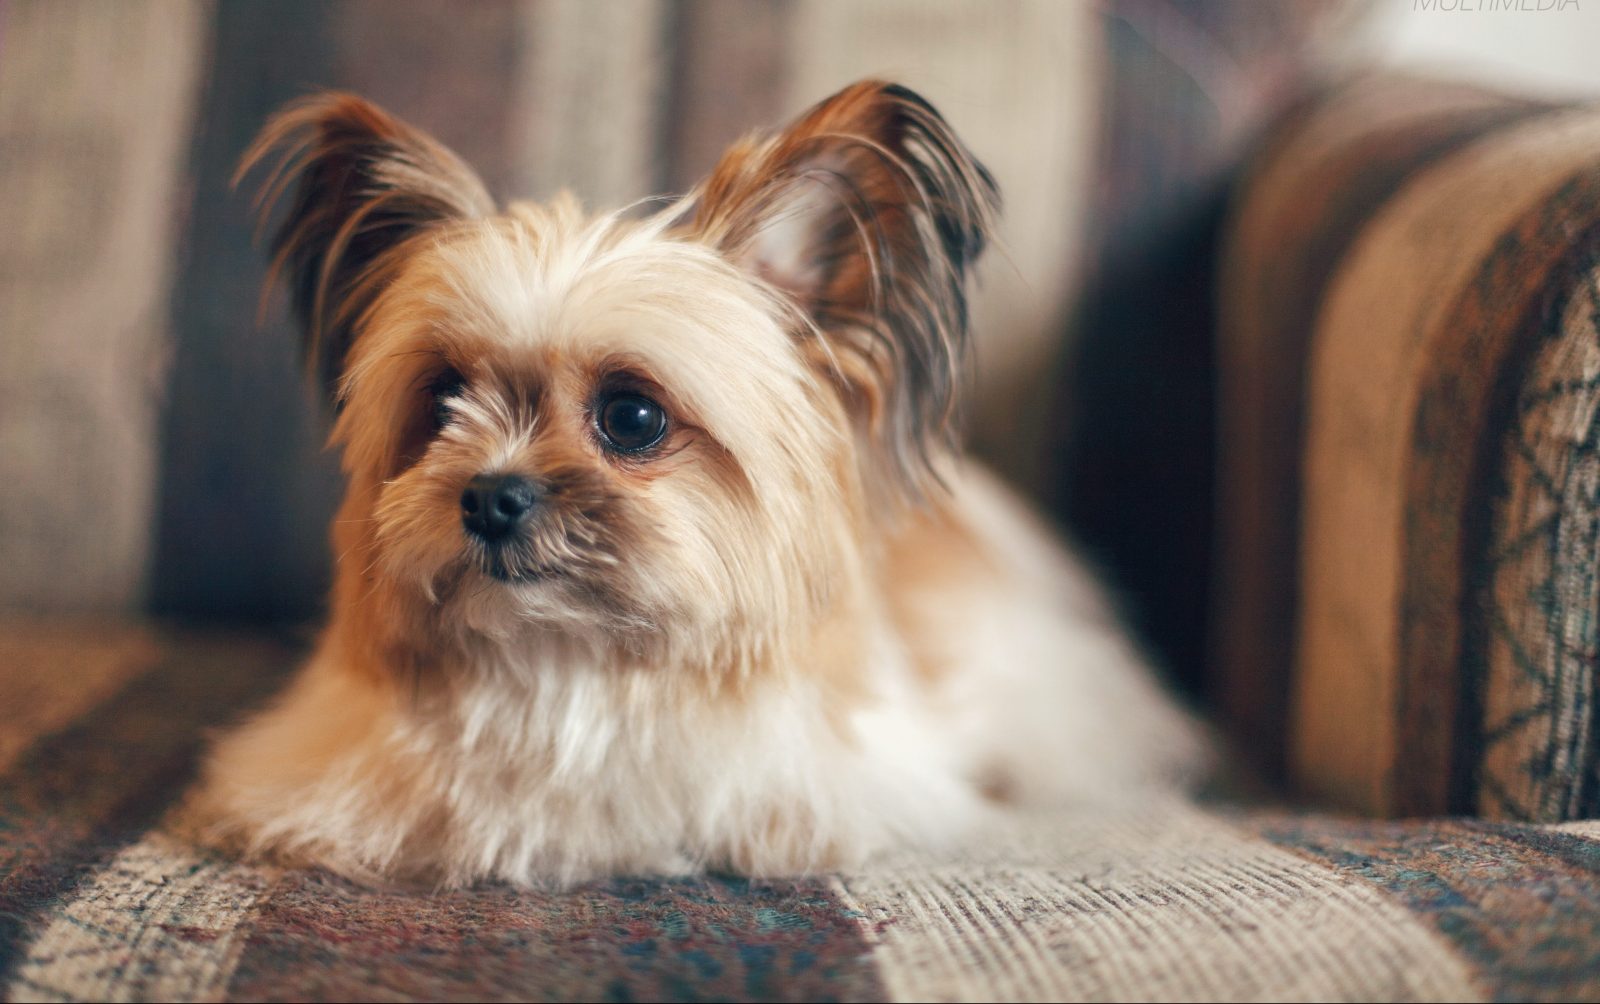 7 in 10 People Can’t Identity More Than 15 of These Dog Breeds 🐕 — Let’s See If You Can Do It Shih Tzu